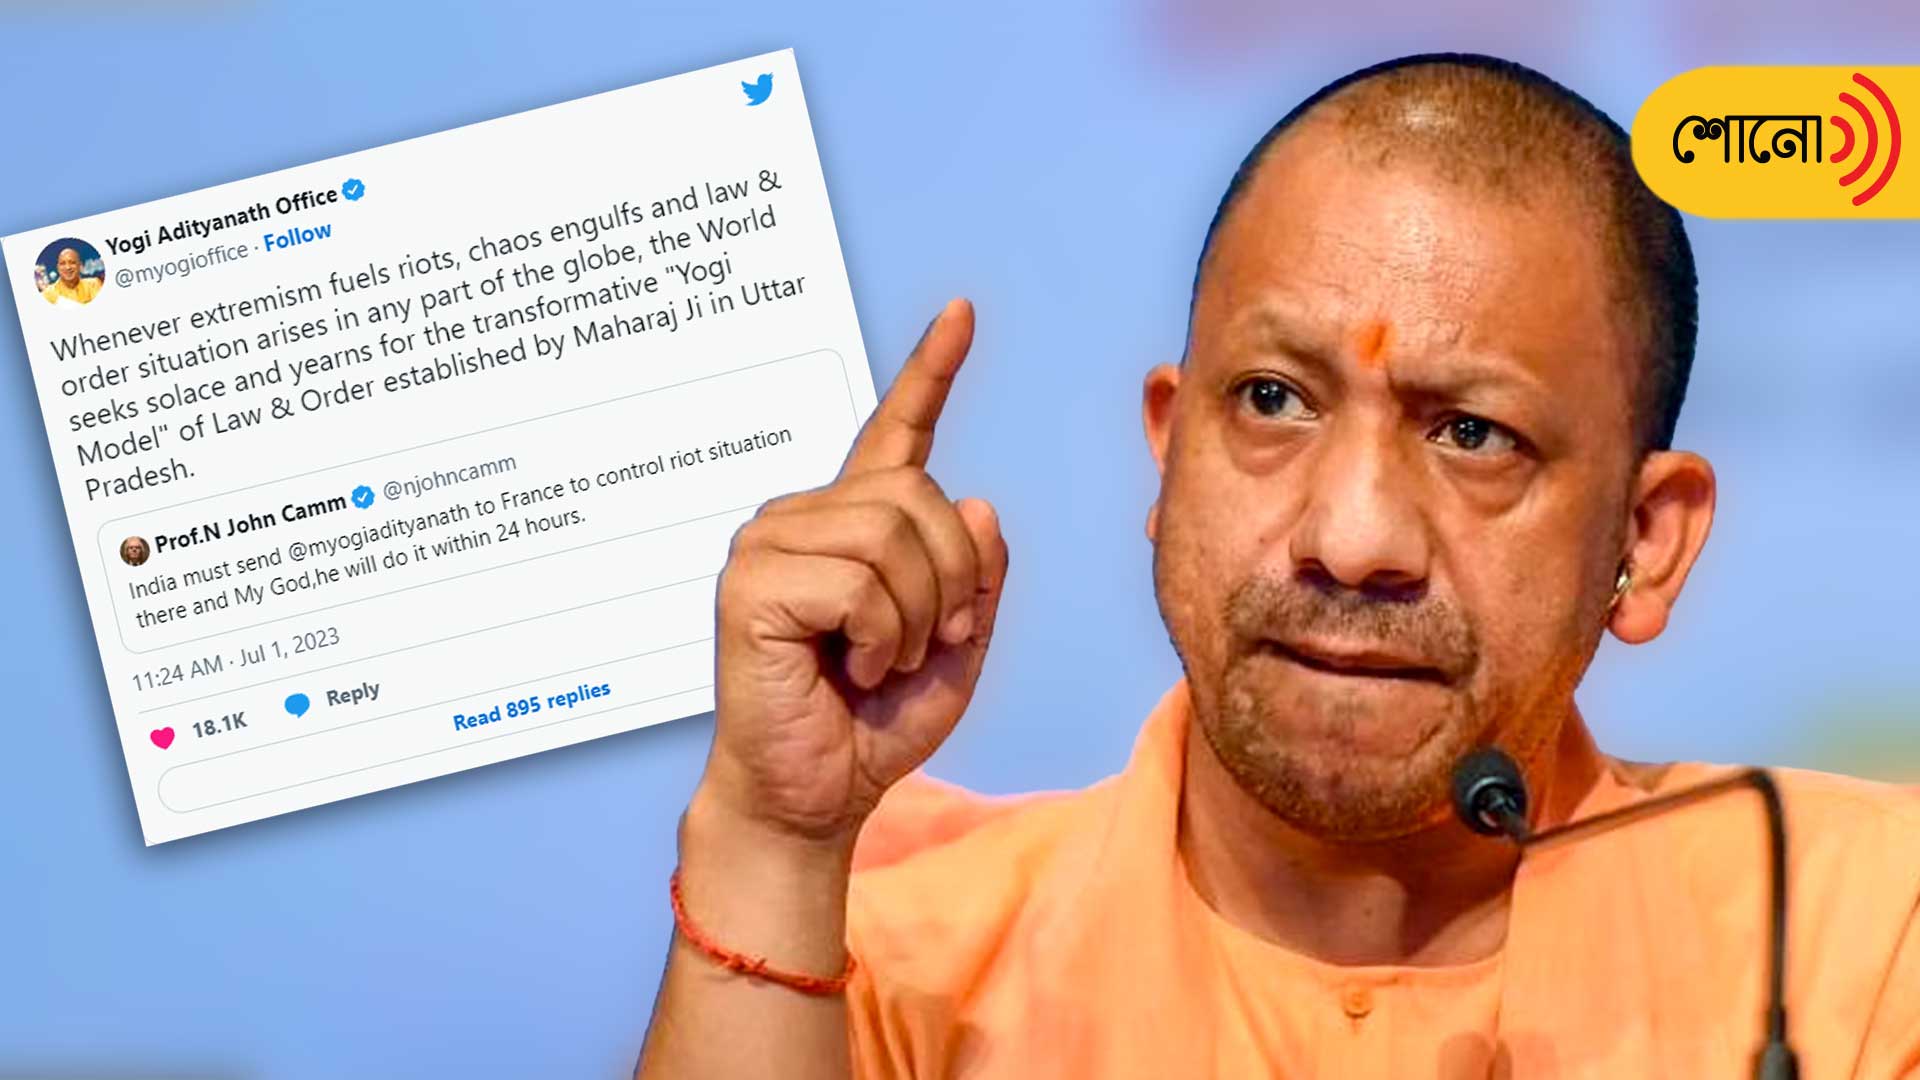 Twitter User Suggests Sending UP CM Yogi To Paris Amid Violence, CMO Reacts